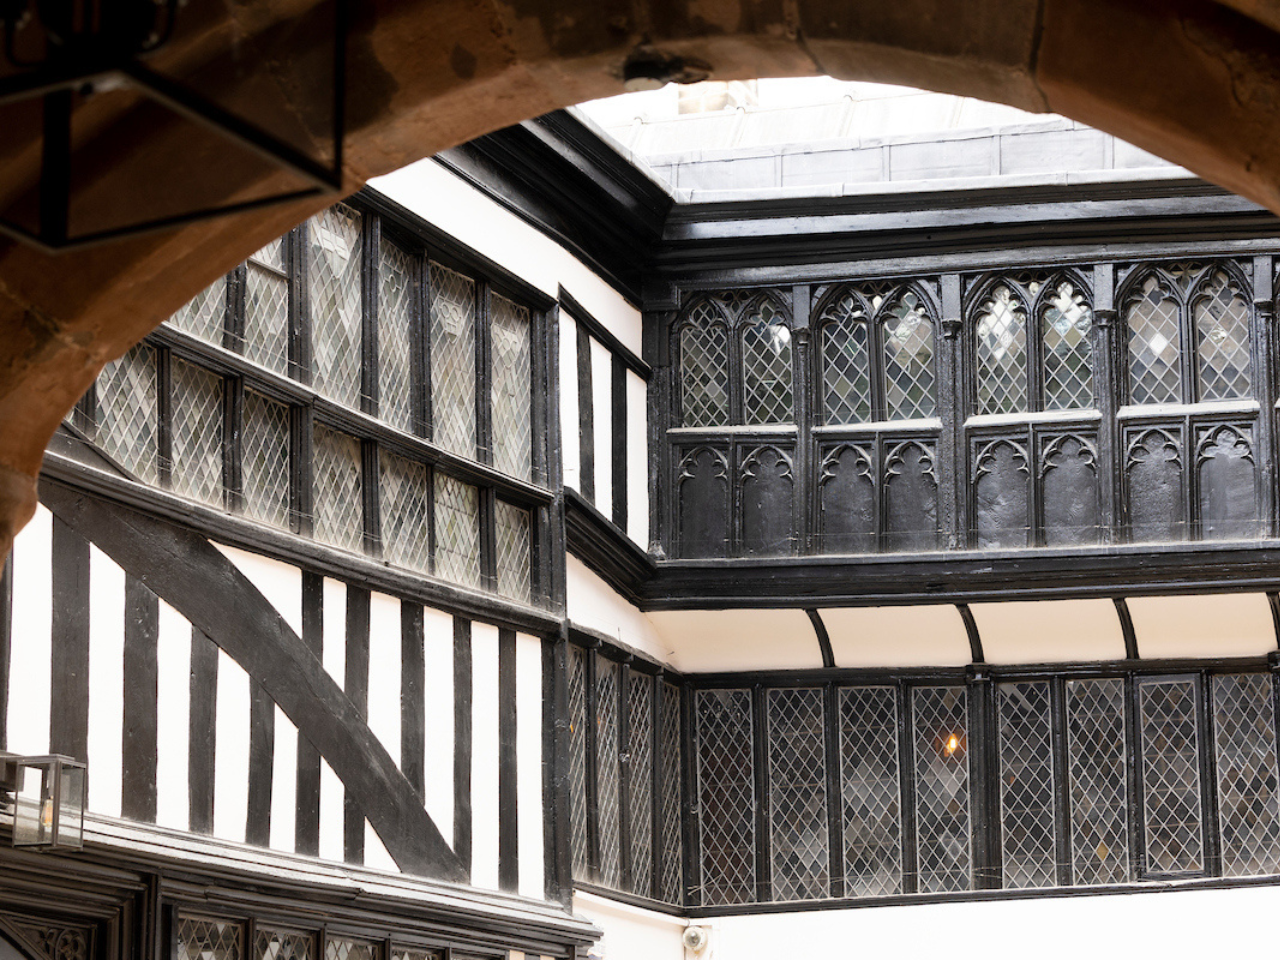 Work with us at St Mary's Guildhall